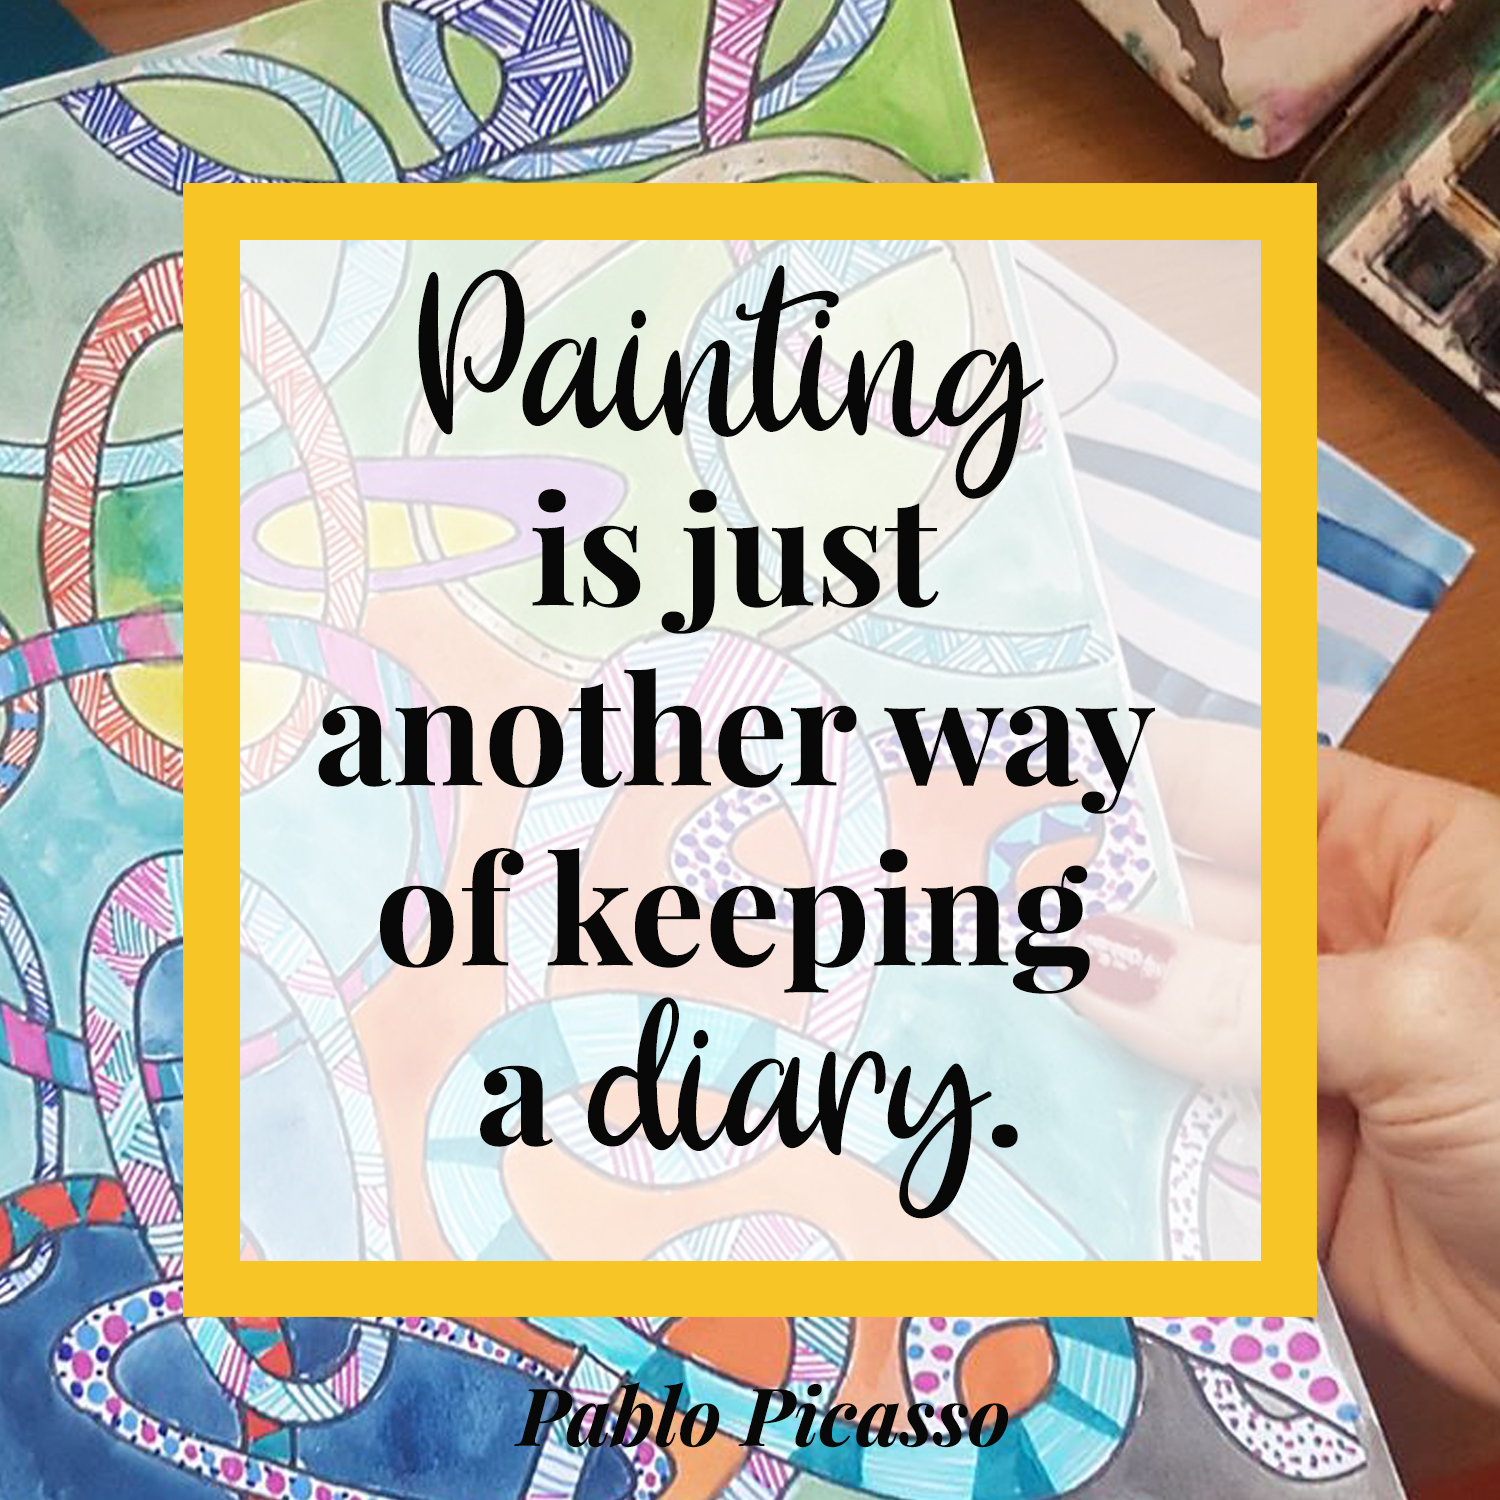 Painting is just another way of keeping a diary - pablo picasso